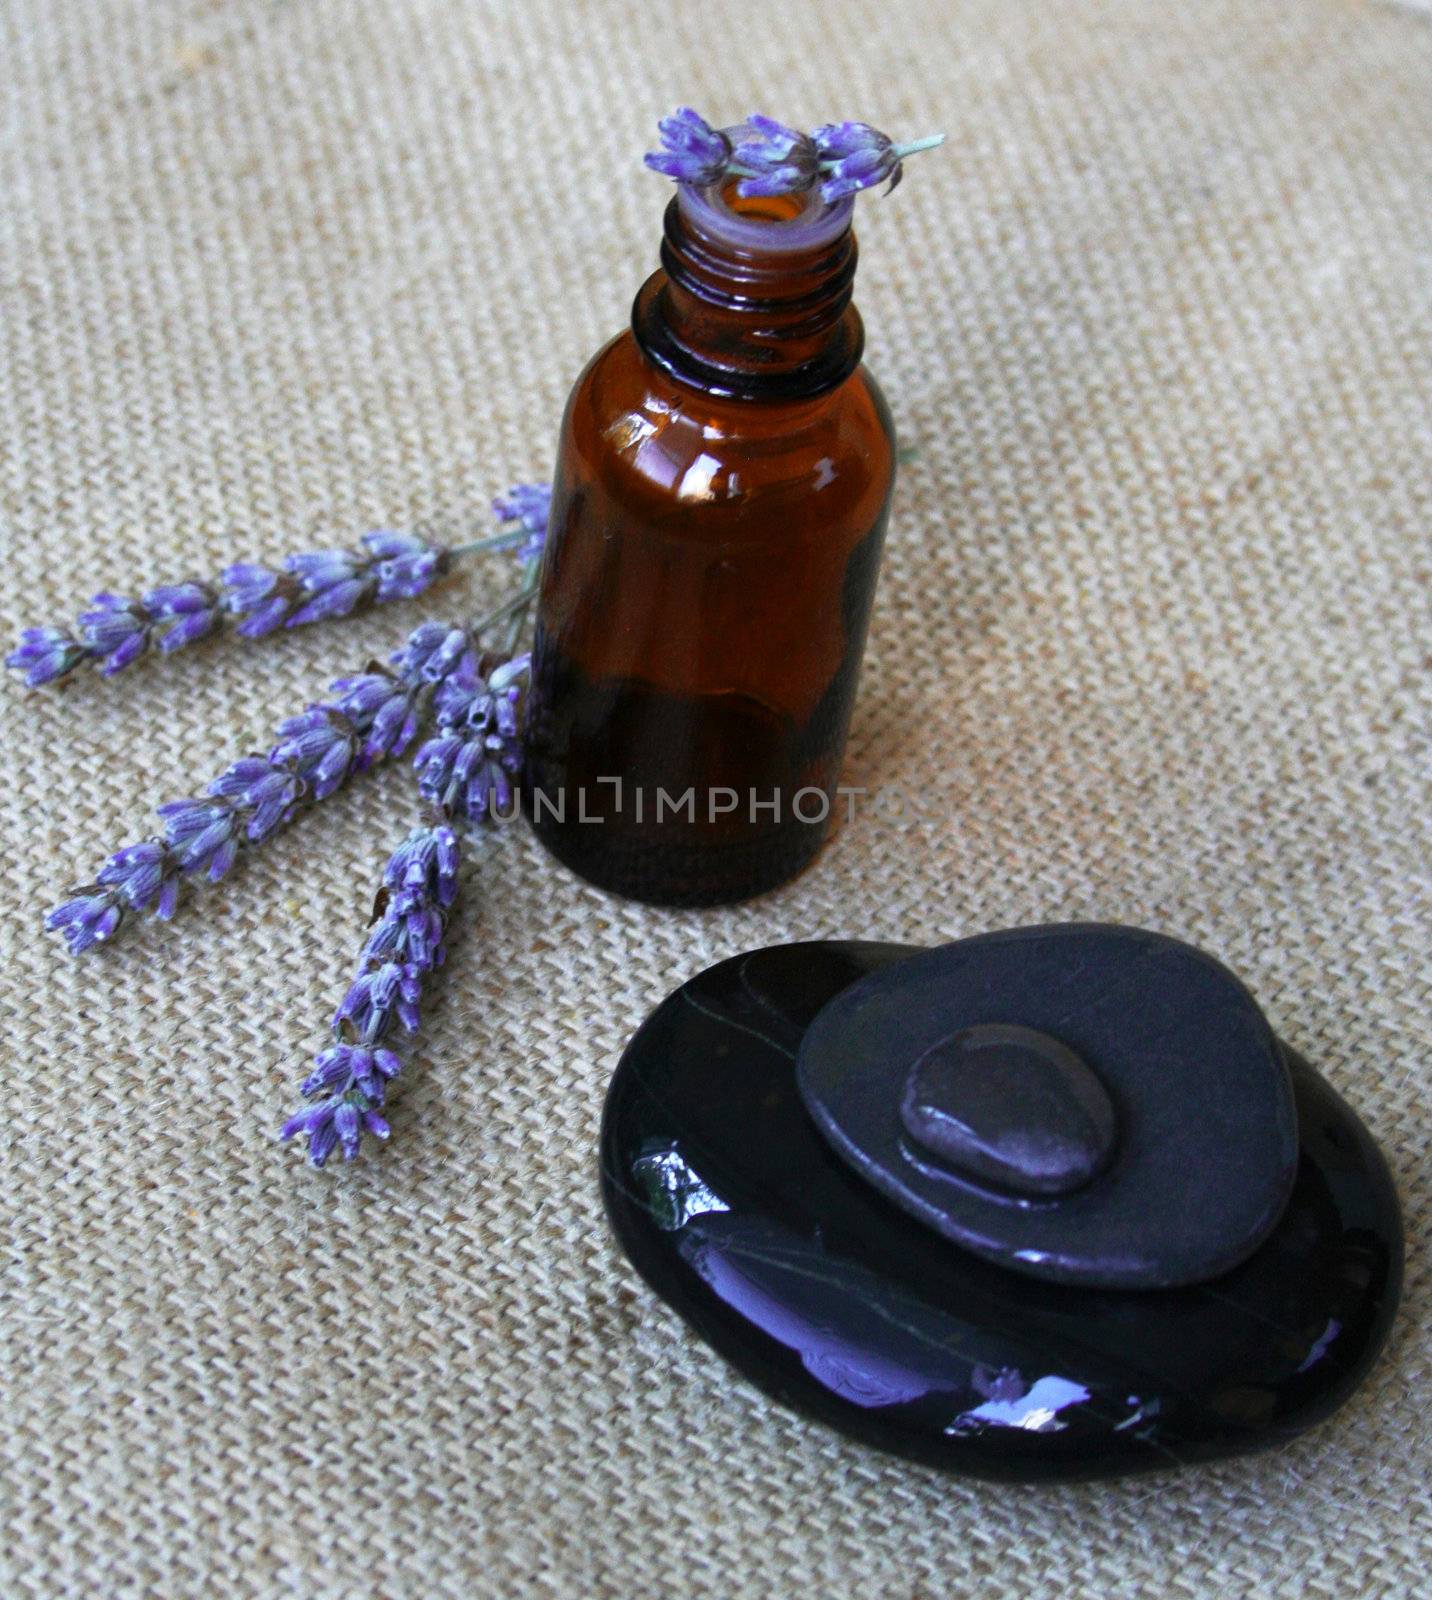 Lavender flowers, bottle of essential oil and black stones on sackcloth background in a spa composition